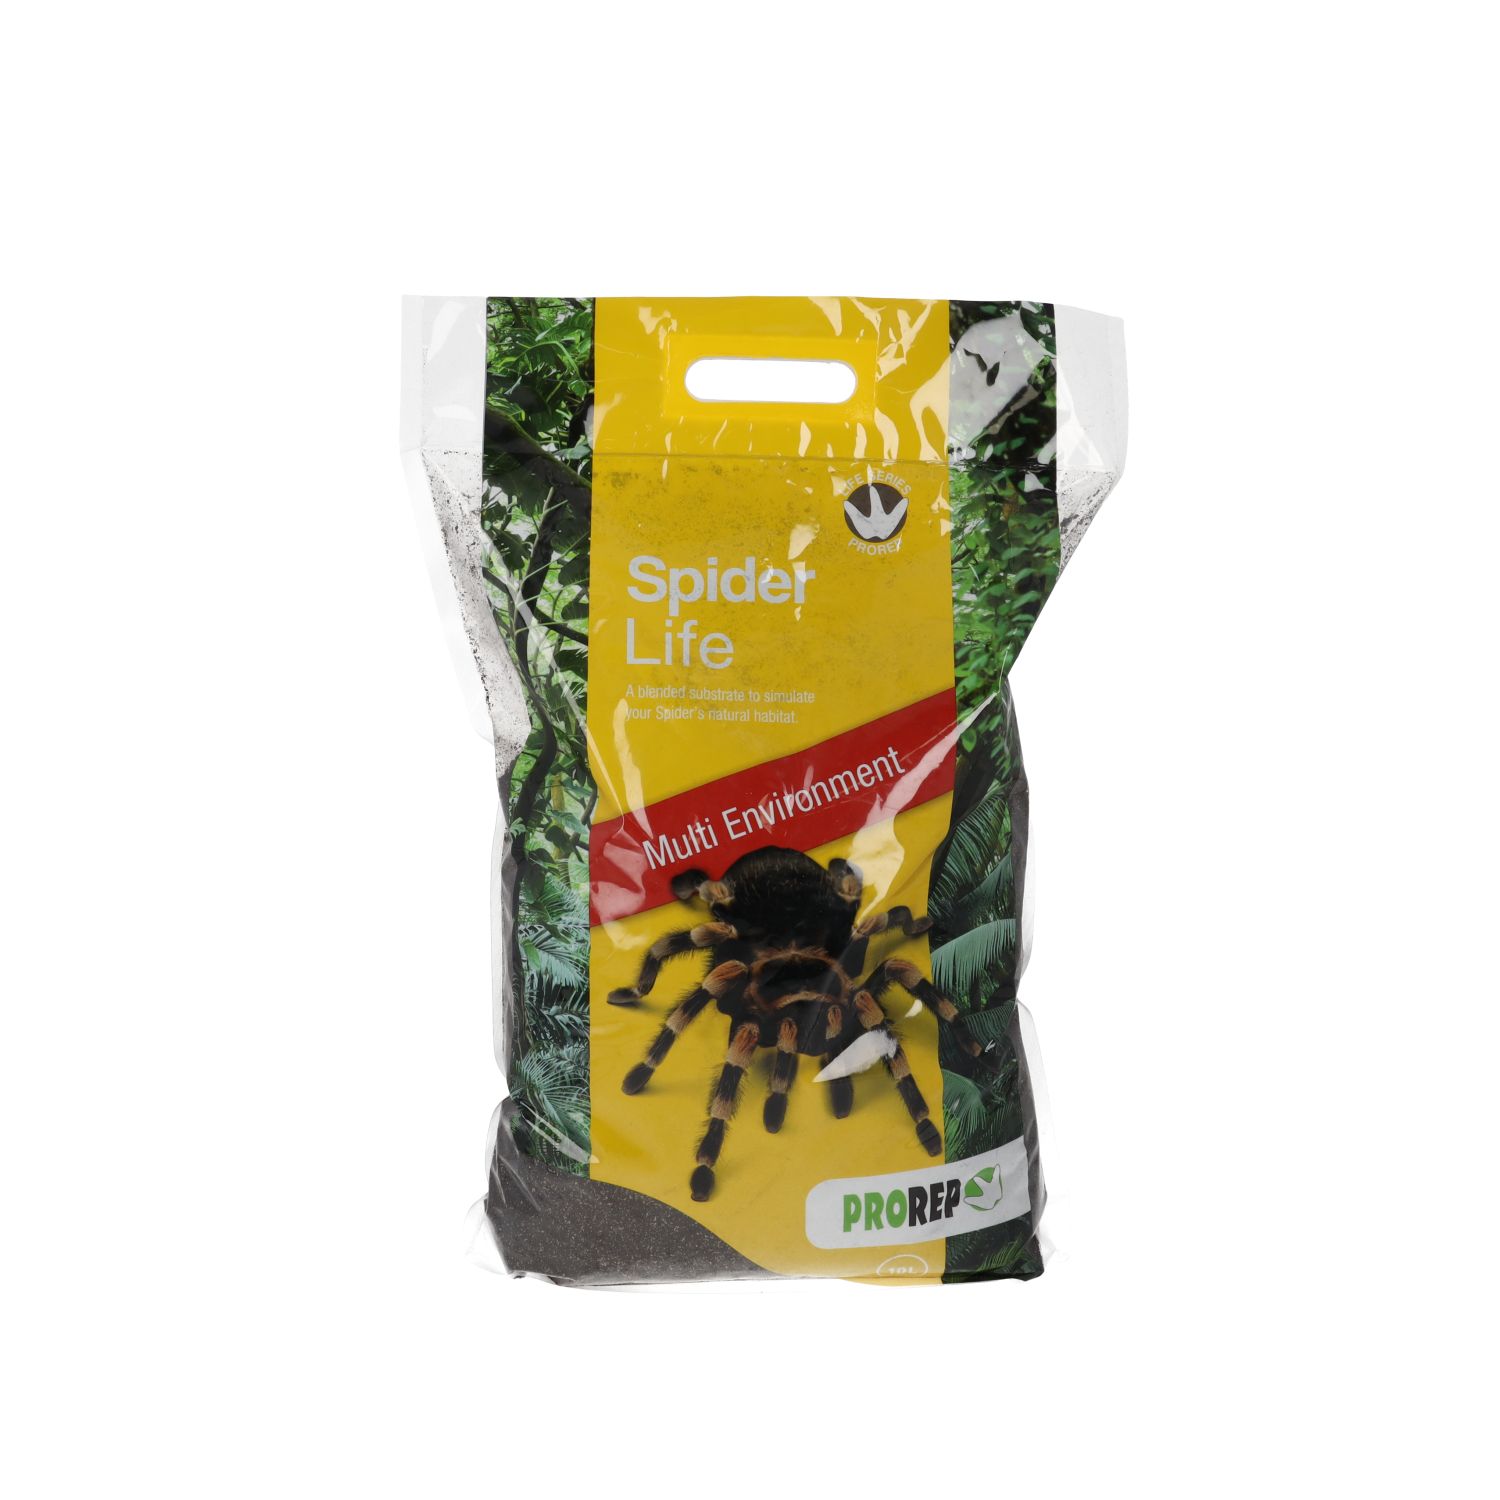 PR Spider Life Substrate, 10 Litre